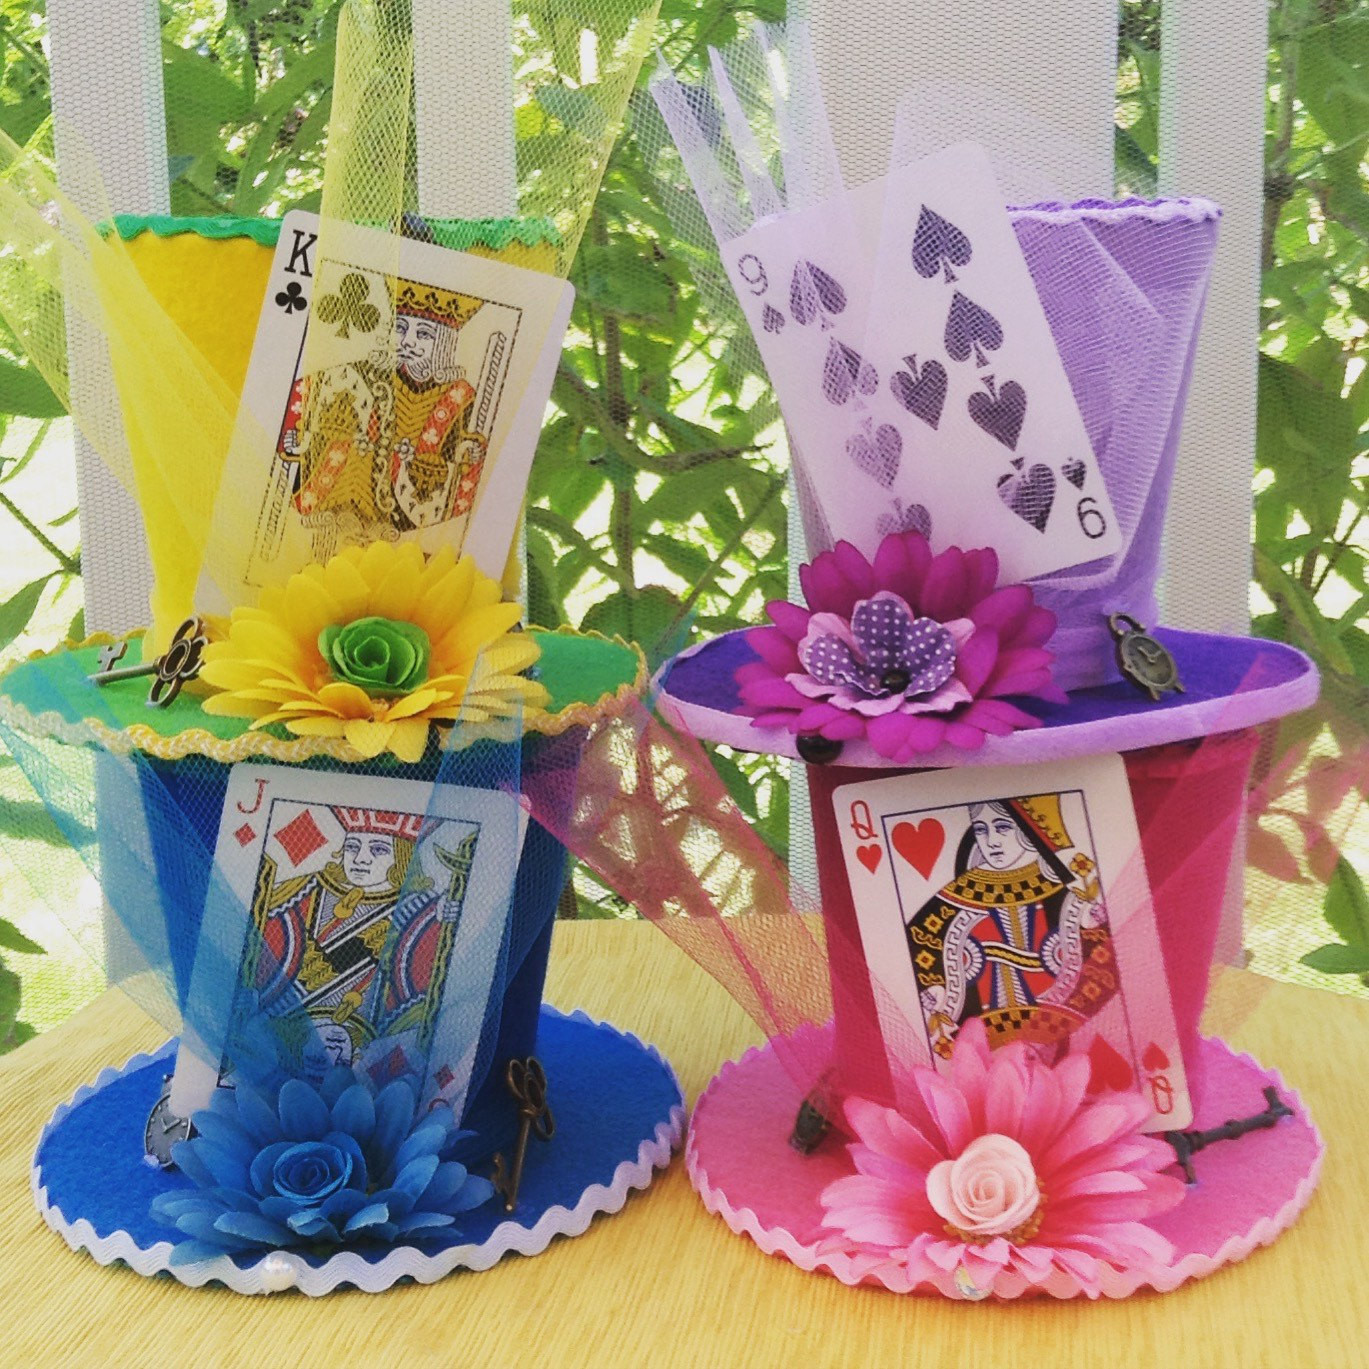 Mad Hatter Tea Party Decoration Ideas
 Mad Hatter Tea Party Decorations Set of 4 Alice in